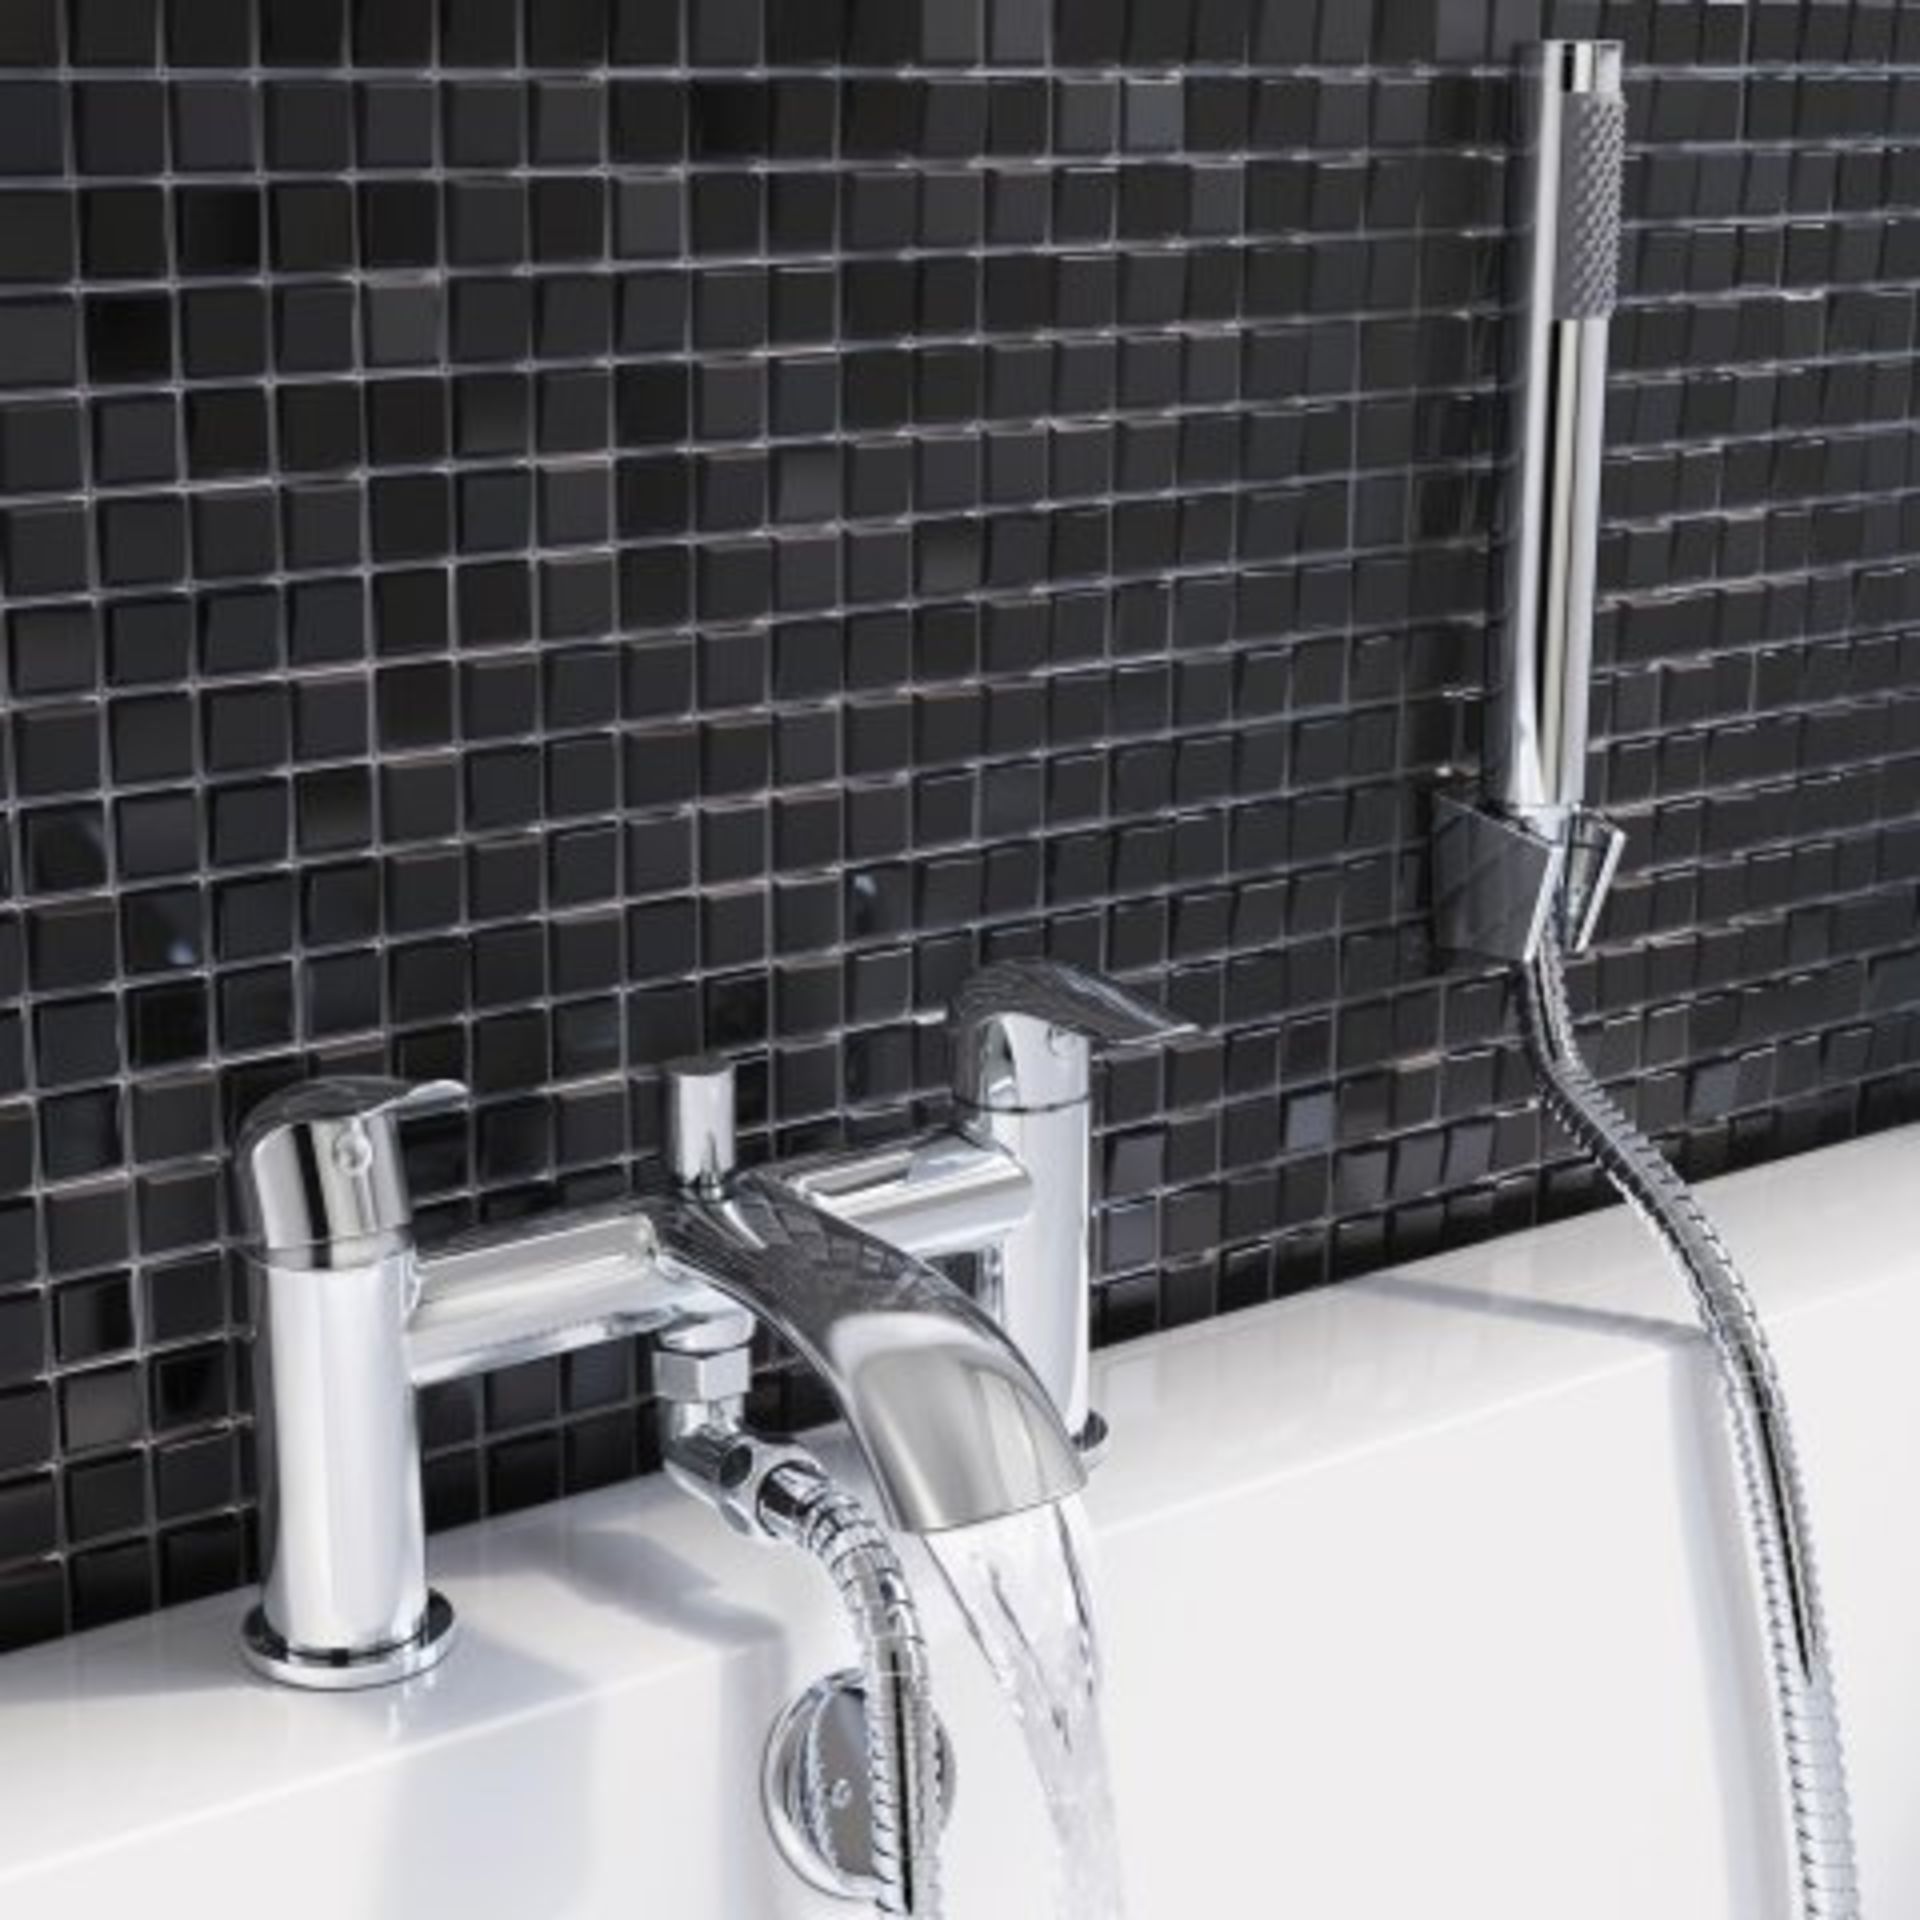 (SKU351) Melville Bath Mixer with Handheld Shower Head. RRP £174.99. The dramatically curved spout